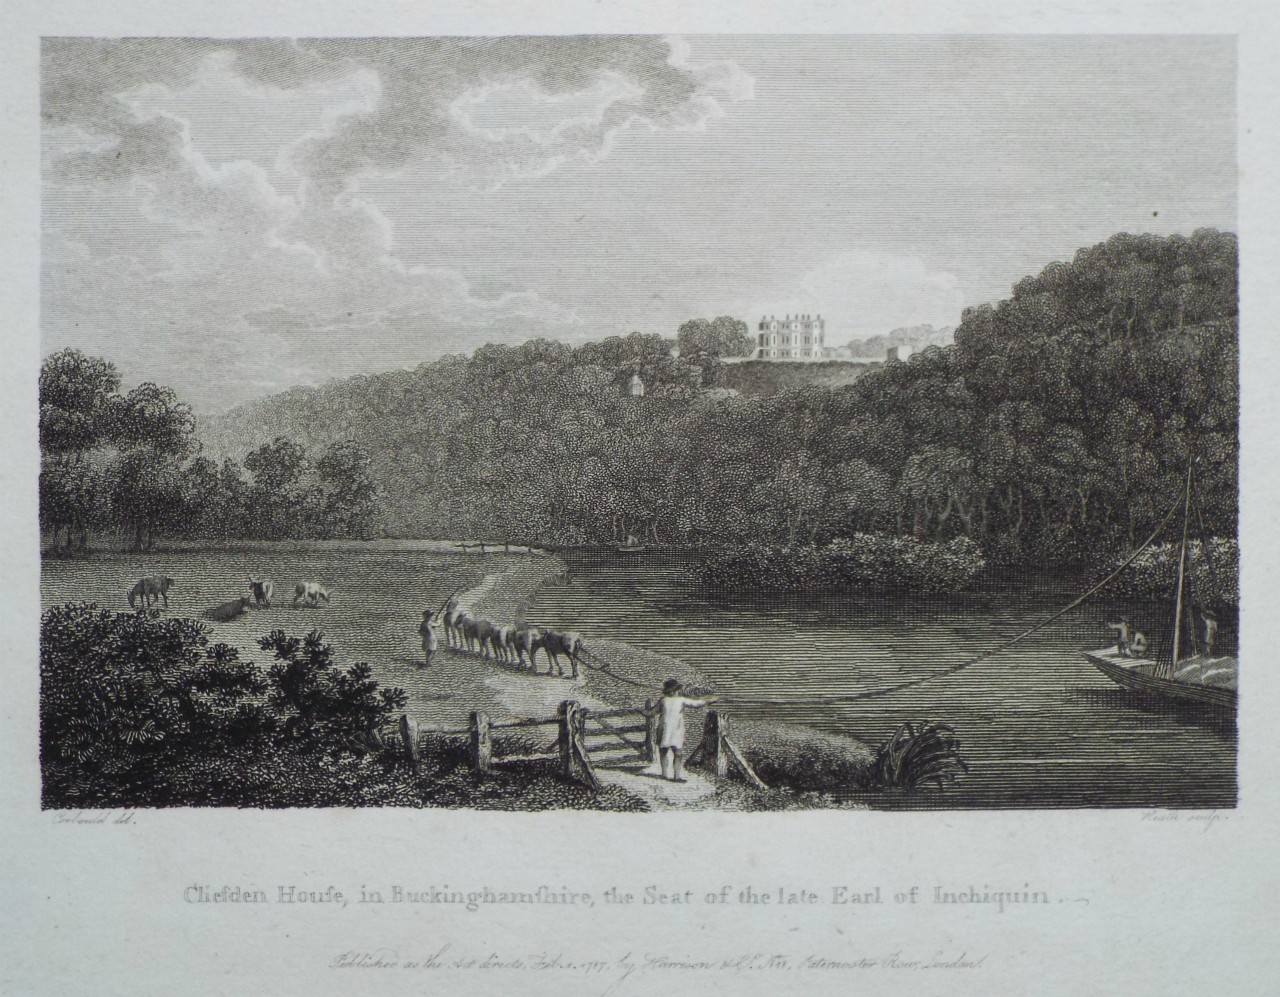 Print - Cliefden House, in Buckinghamshire, the Seat of the Late Lord Inchiquin. - 